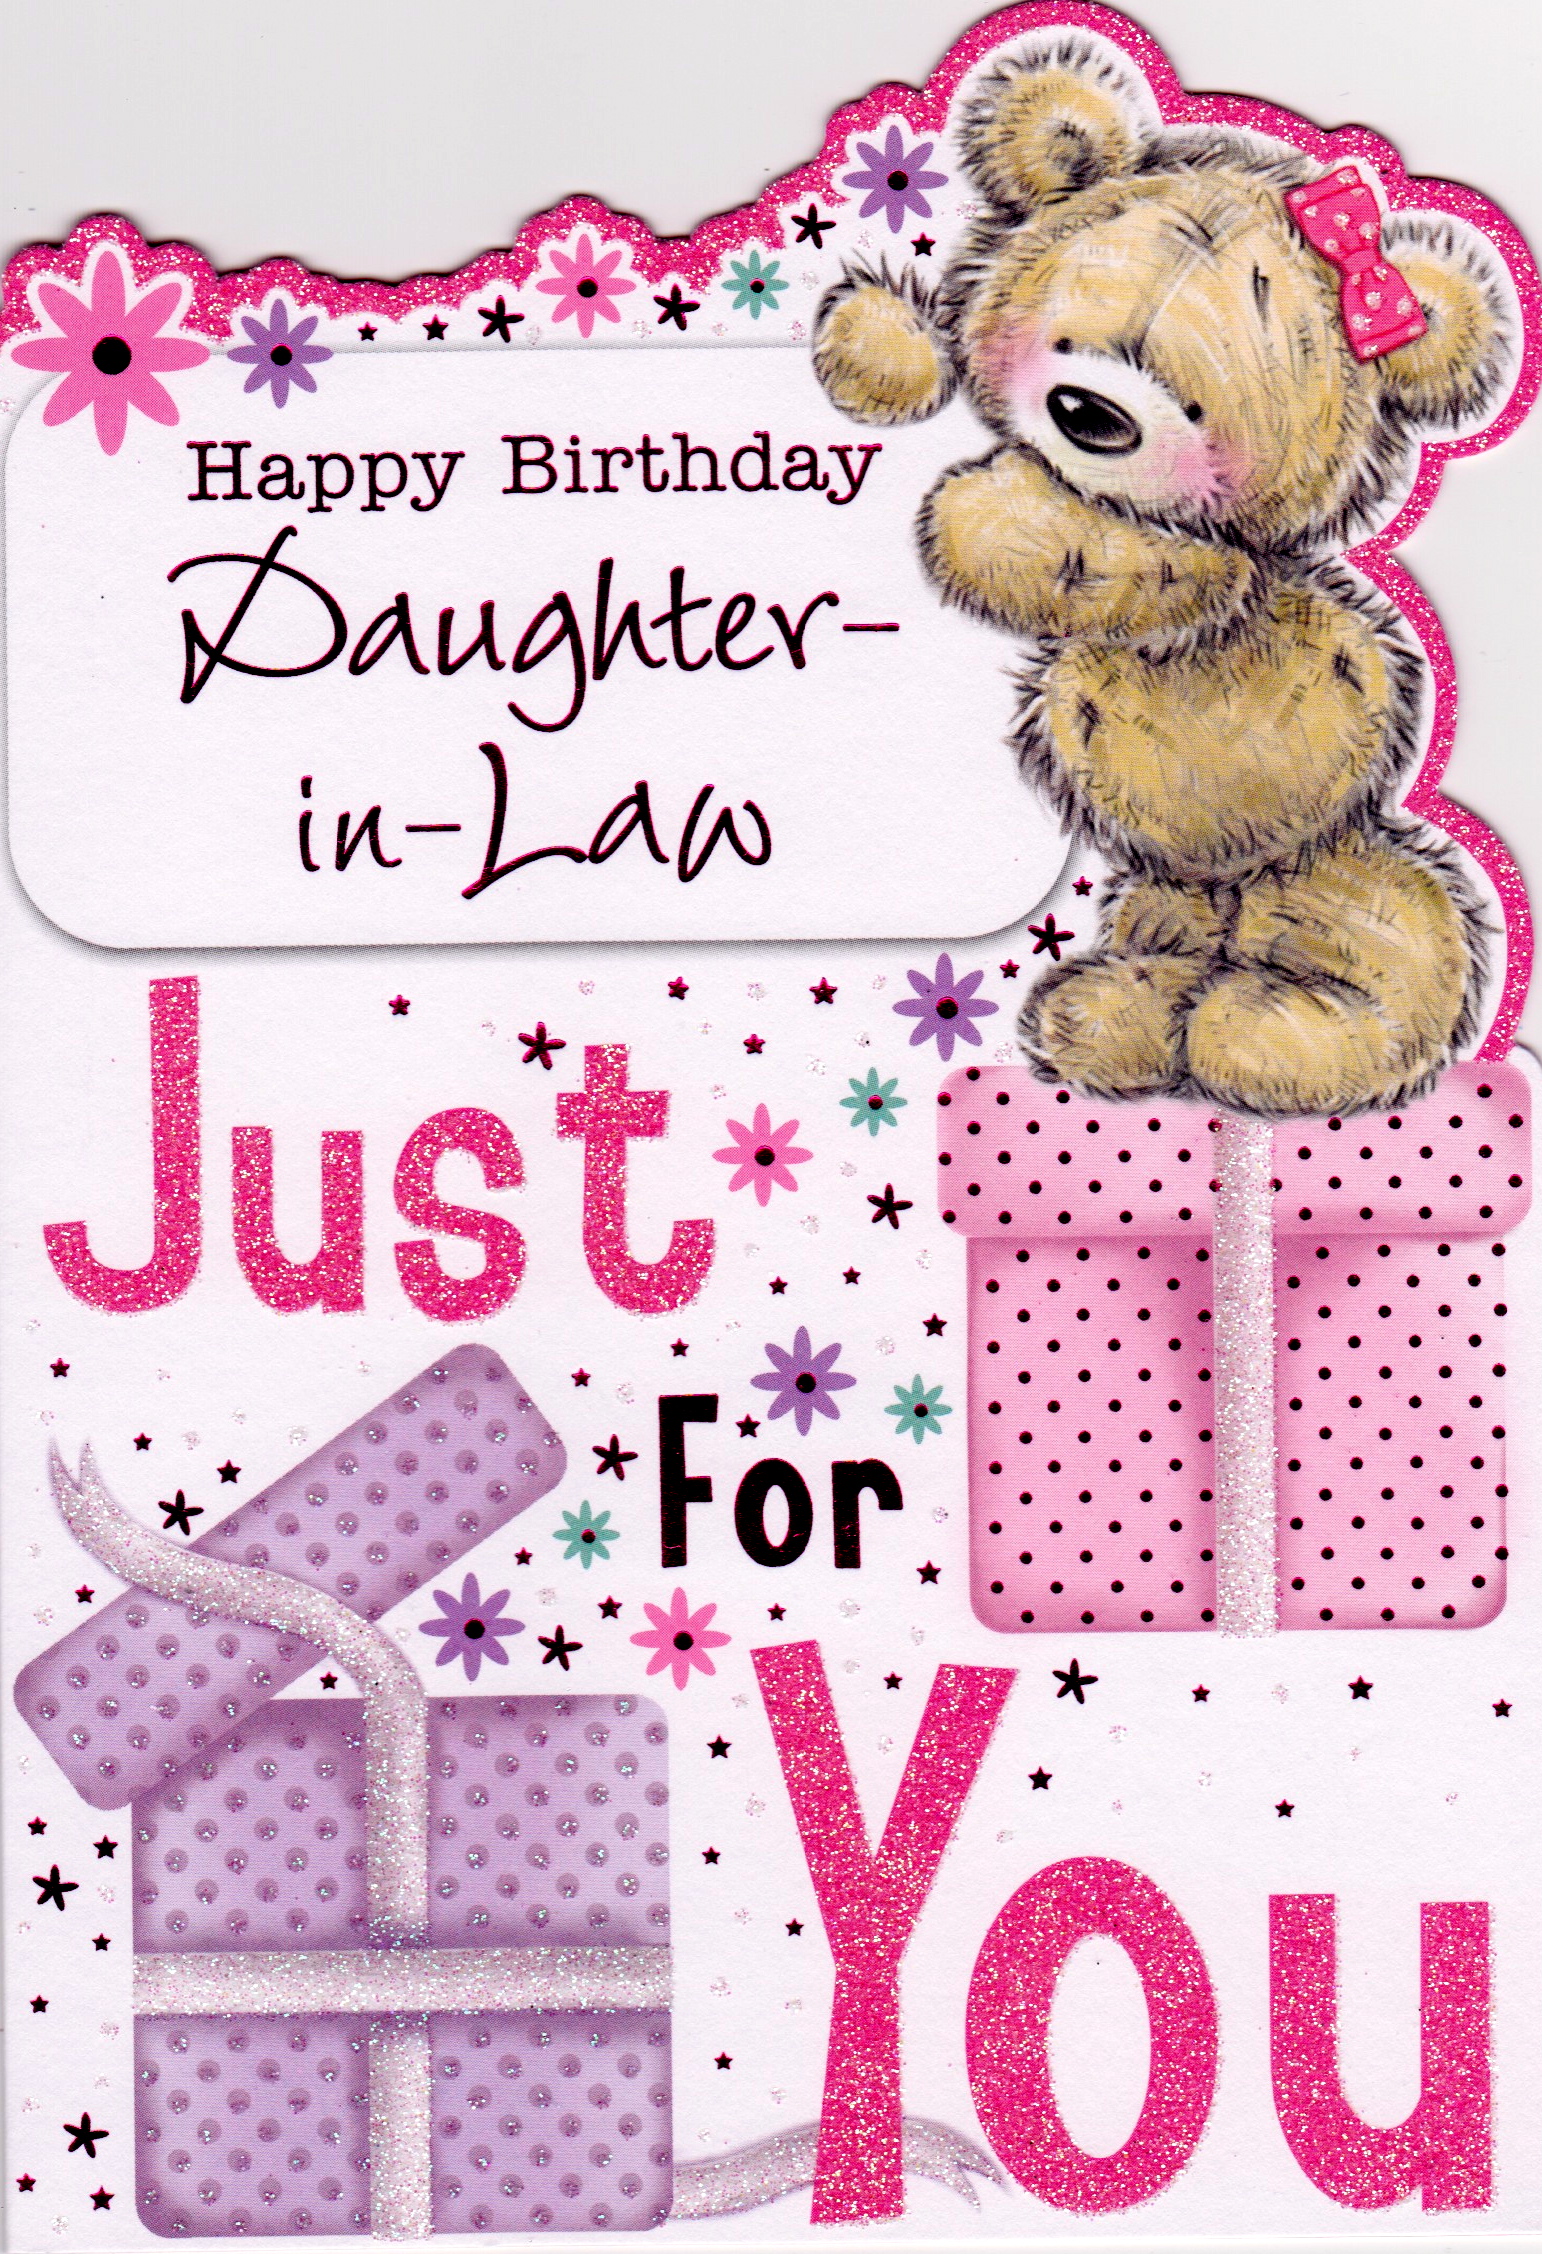 Happy Birthday Daughter In Law Quotes.